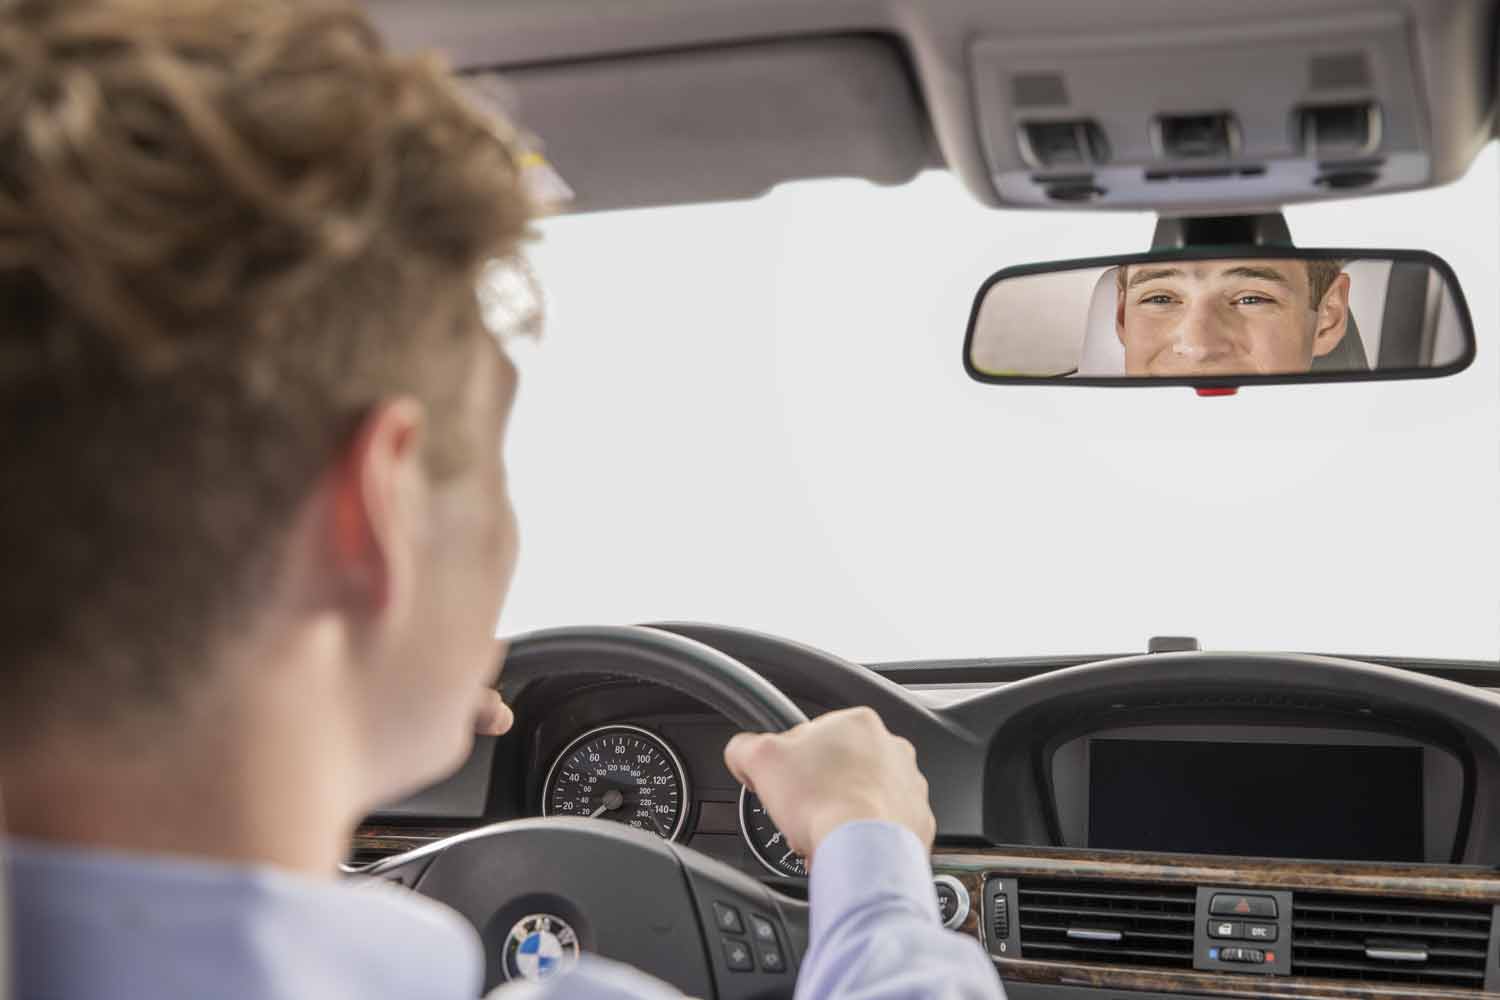 Eye Check Mirror, Driving Instructor Mirrors